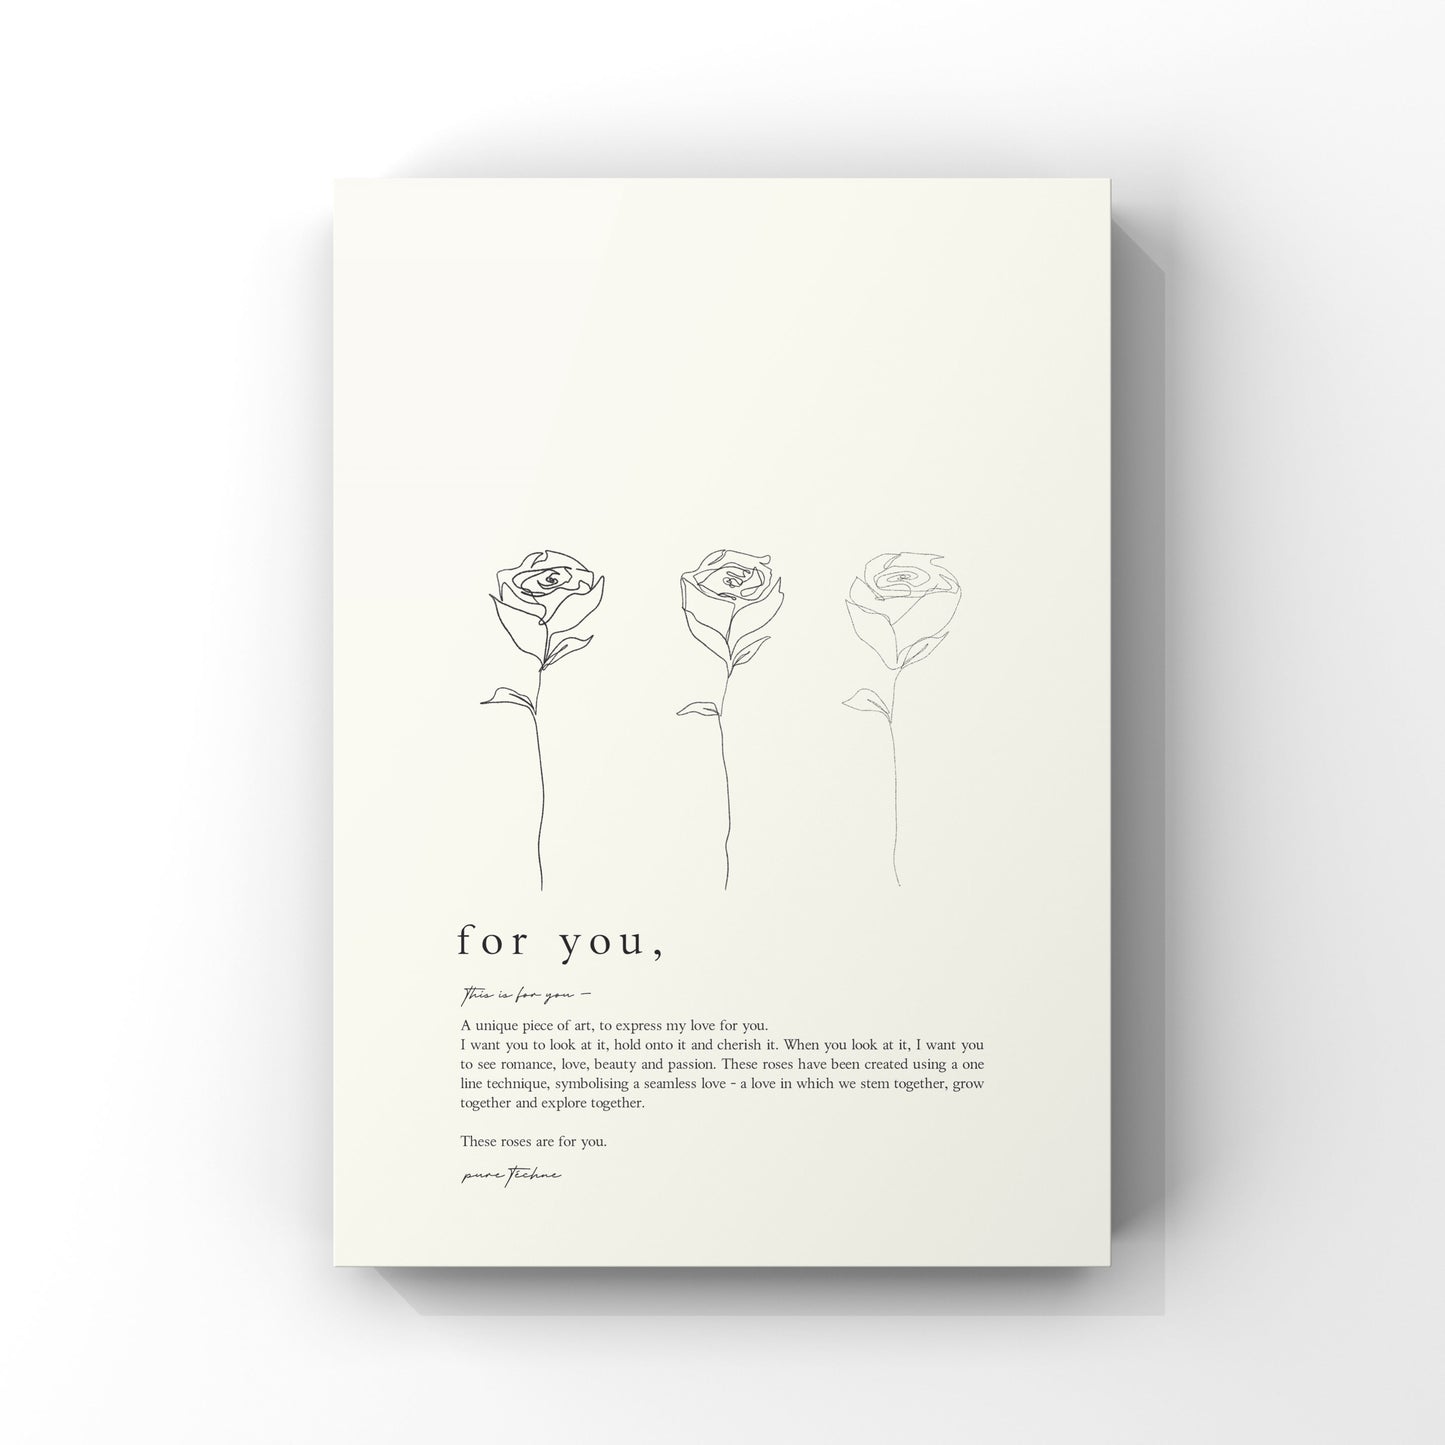 A art piece of three continuous one line drawings of roses - with a written piece personalised for your loved one